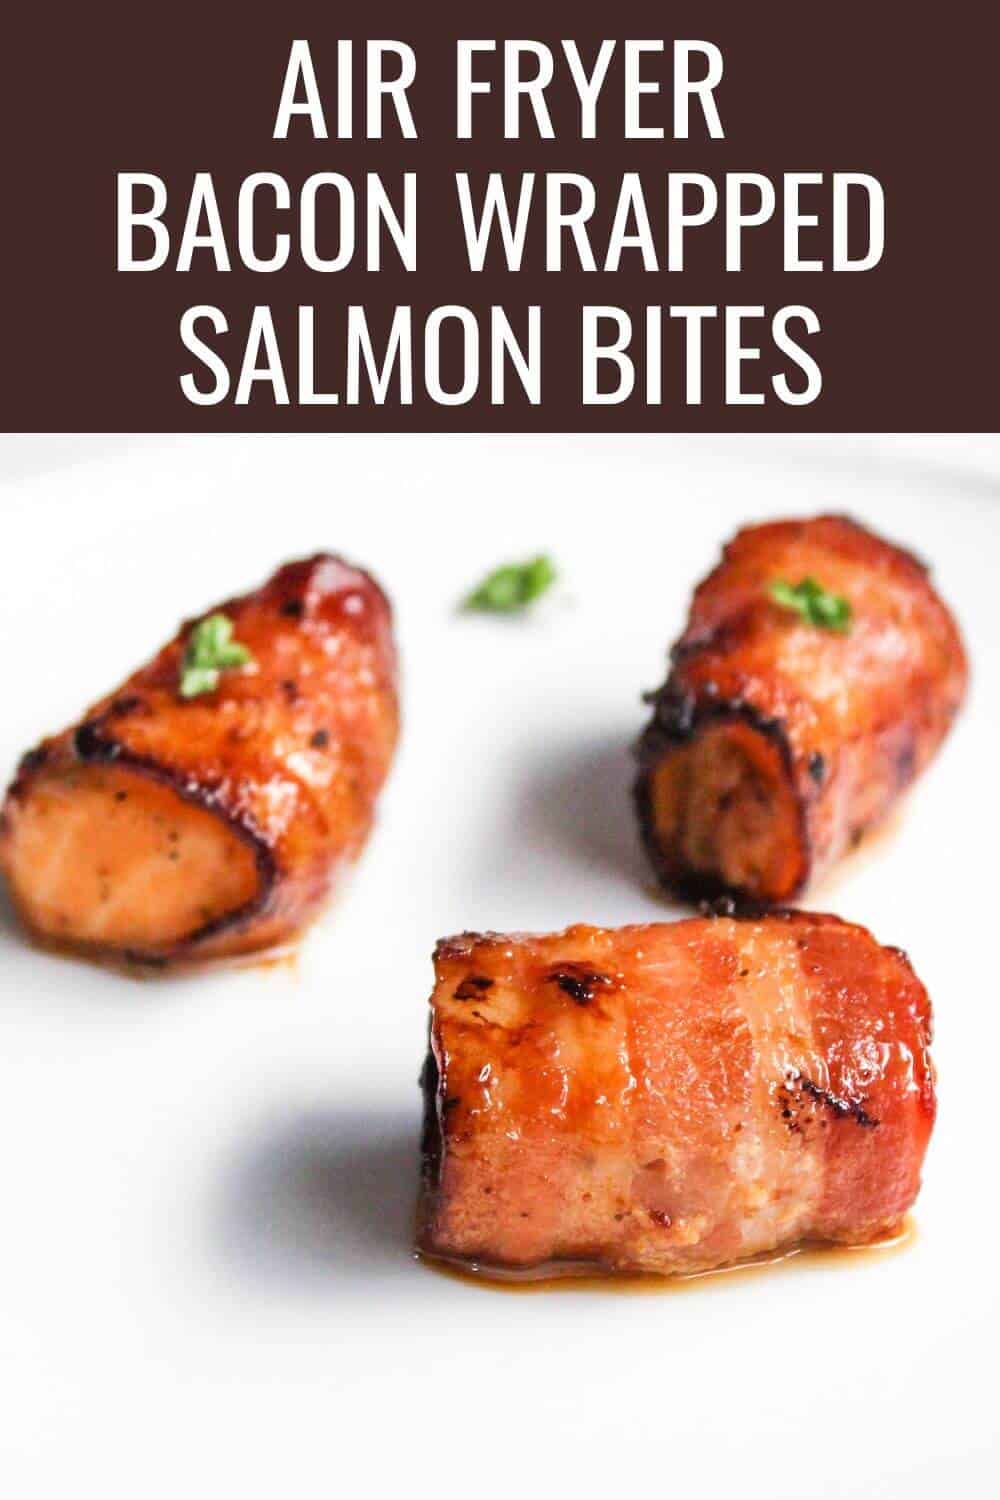 Air fryer bacon wrapped salmon bites are a delicious and healthy appetizer or snack that are sure to impress your guests.